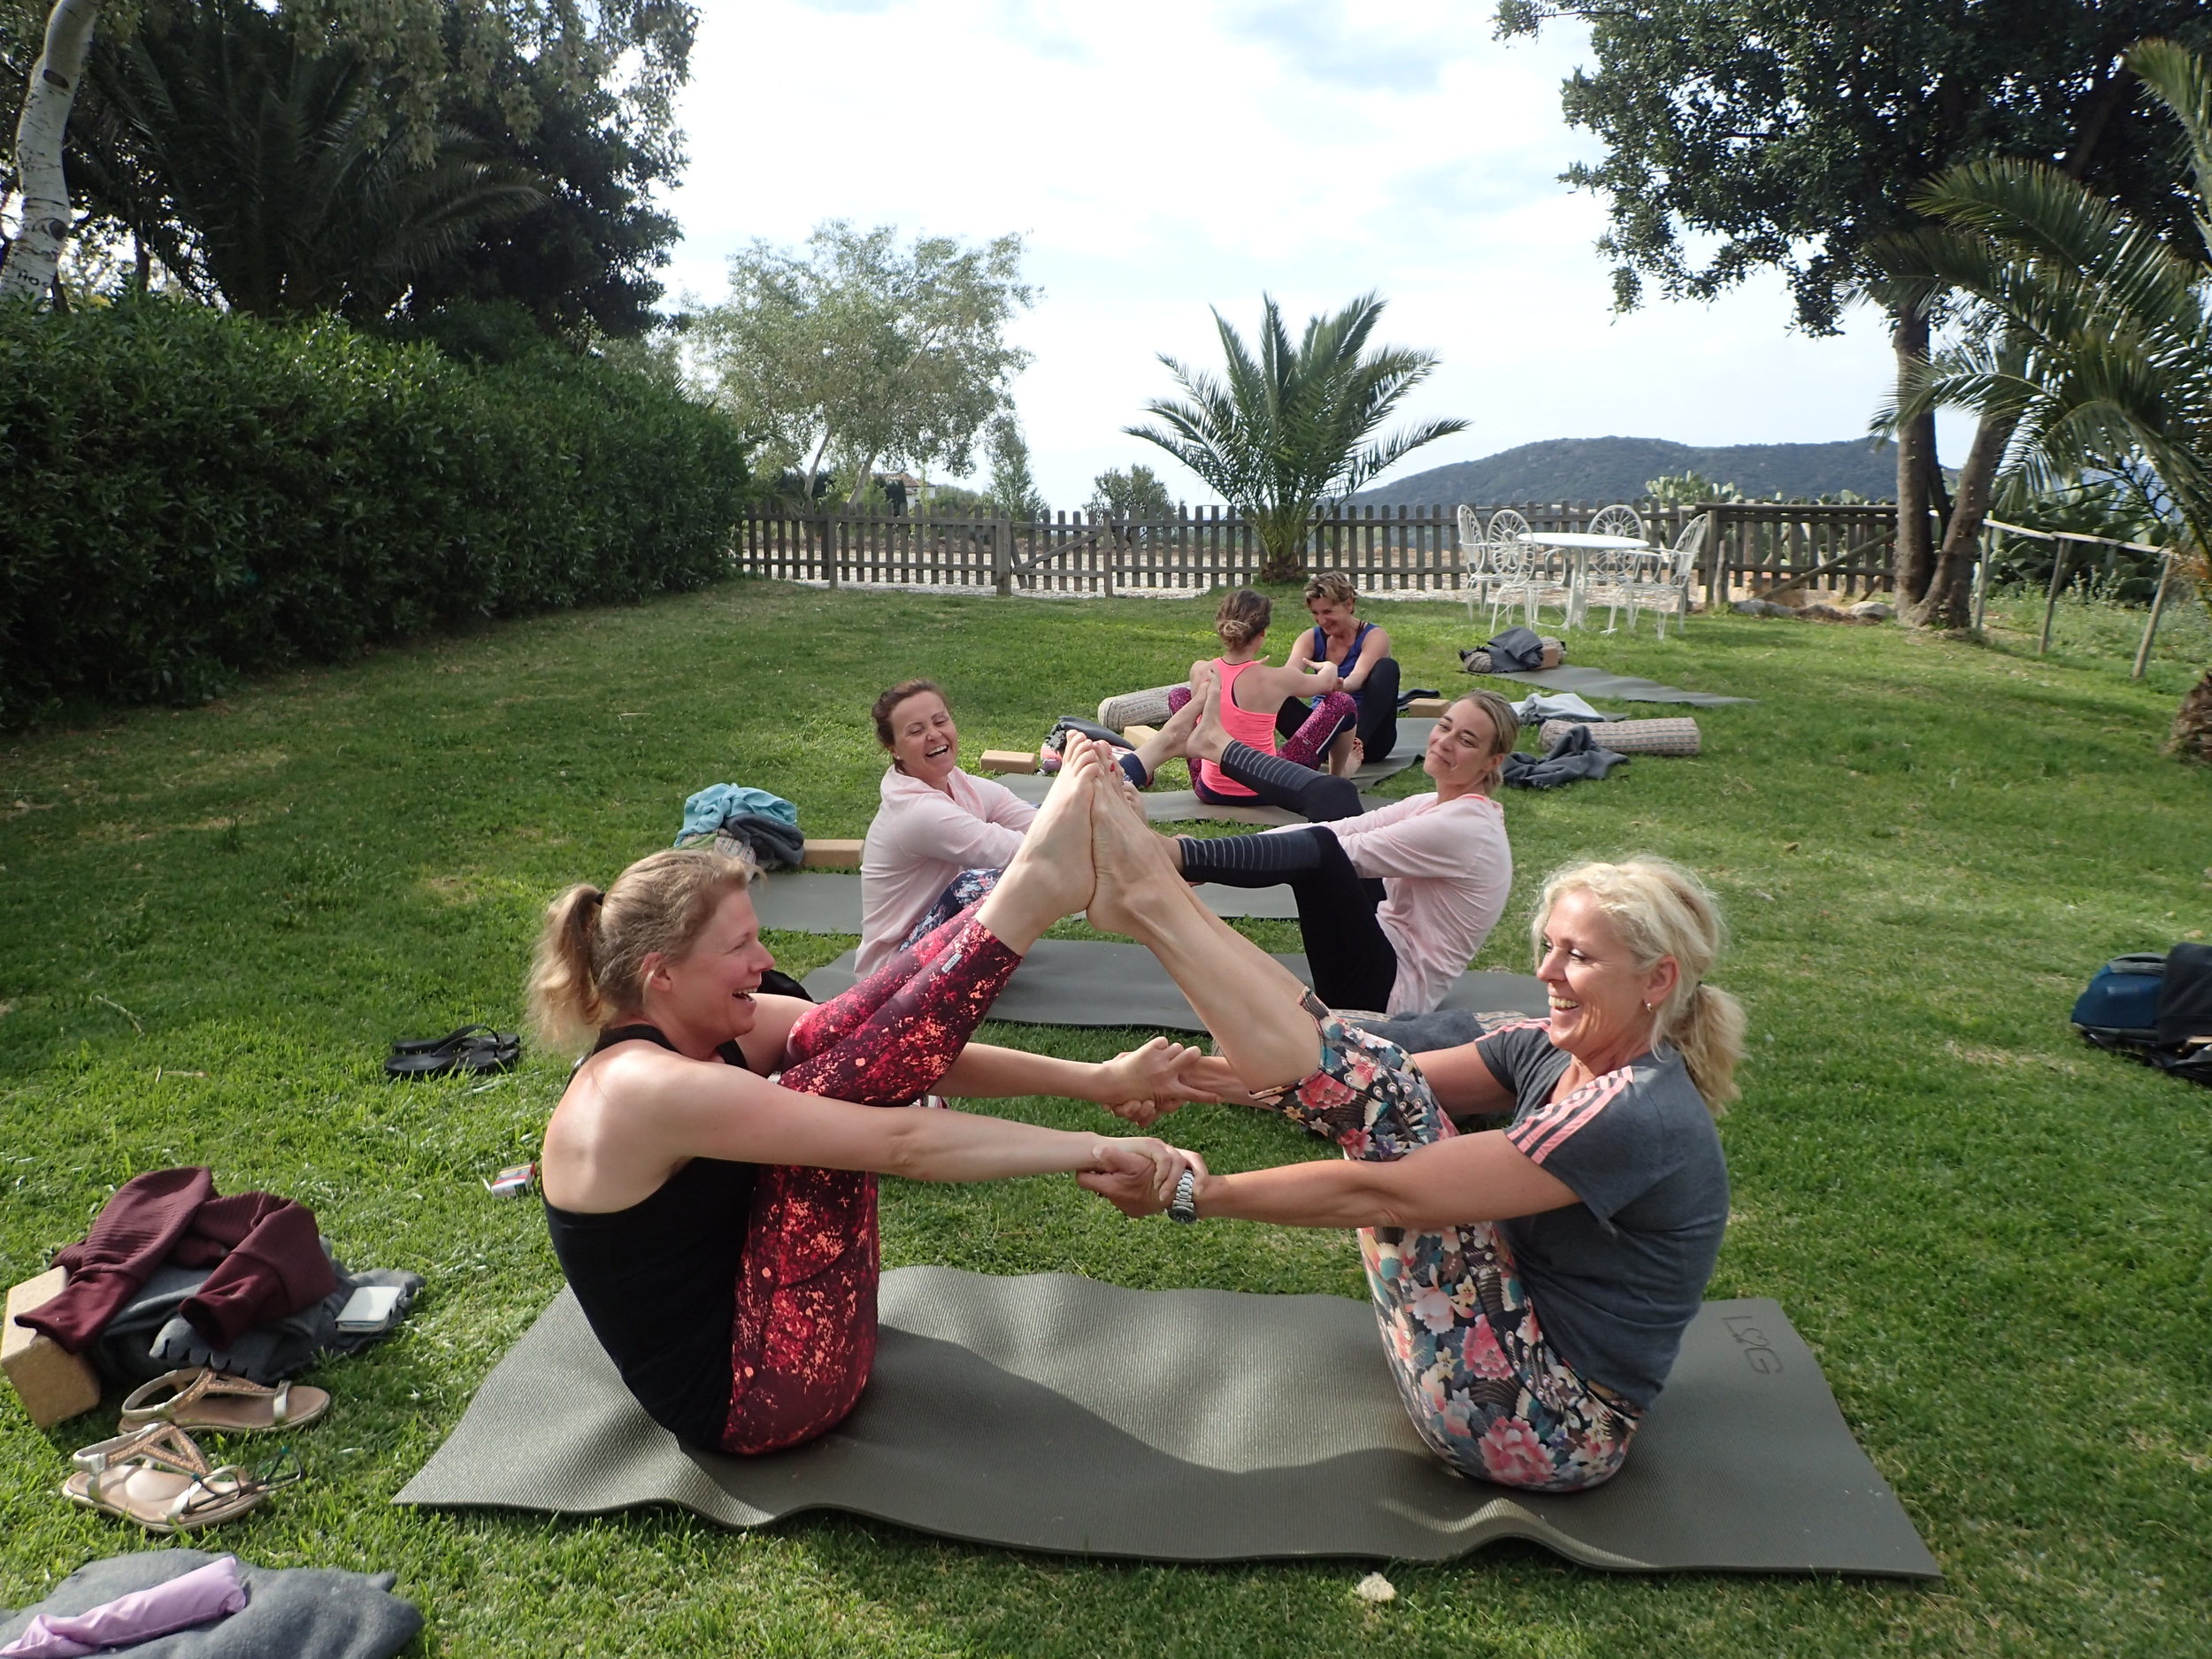 Partner yoga in the garden at Yin Yang Yoga retreat in the Malaga mountains in Spain with Jane Bakx Yoga (Copy) (Copy)